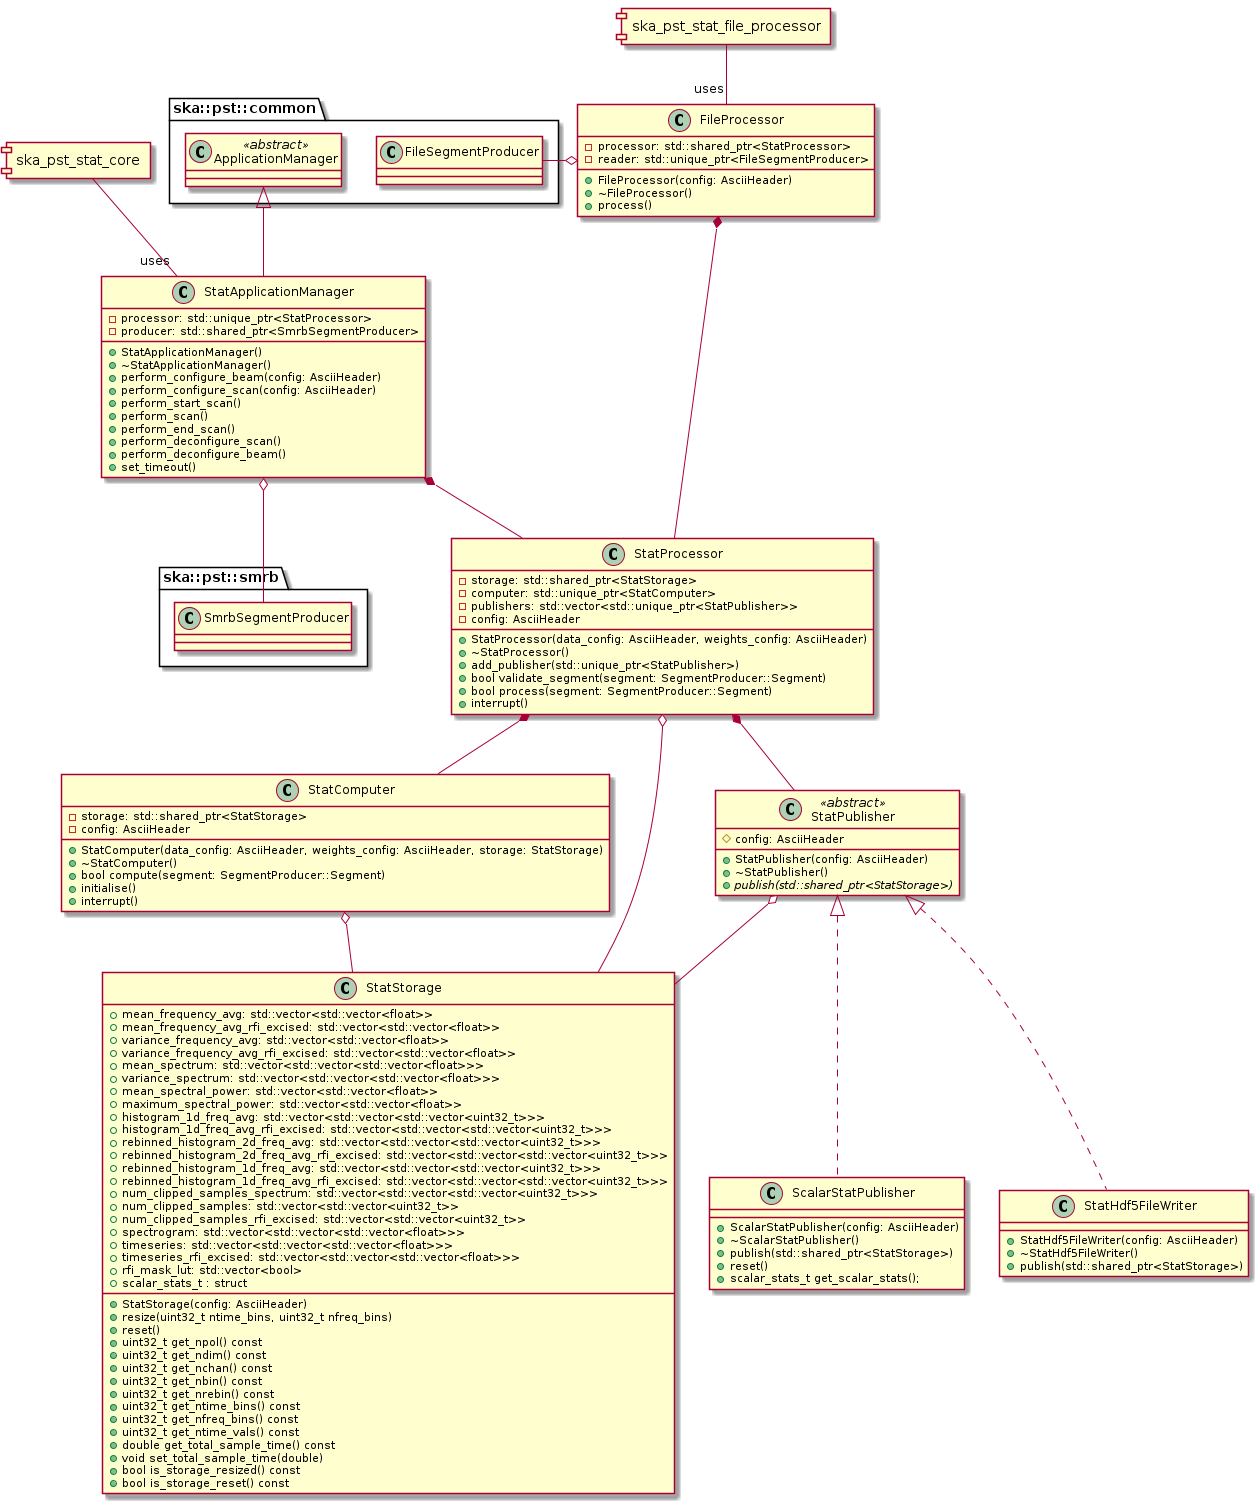 @startuml PST Stat Class Diagram
allow_mixing

package ska::pst::common
{
  class ApplicationManager <<abstract>>
  class FileSegmentProducer
}

package ska::pst::smrb
{
  class SmrbSegmentProducer
}

class StatApplicationManager {
  + StatApplicationManager()
  + ~StatApplicationManager()
  + perform_configure_beam(config: AsciiHeader)
  + perform_configure_scan(config: AsciiHeader)
  + perform_start_scan()
  + perform_scan()
  + perform_end_scan()
  + perform_deconfigure_scan()
  + perform_deconfigure_beam()
  + set_timeout()
  - processor: std::unique_ptr<StatProcessor>
  - producer: std::shared_ptr<SmrbSegmentProducer>
}

class FileProcessor {
  + FileProcessor(config: AsciiHeader)
  + ~FileProcessor()
  + process()
  - processor: std::shared_ptr<StatProcessor>
  - reader: std::unique_ptr<FileSegmentProducer>
}

class StatProcessor {
  + StatProcessor(data_config: AsciiHeader, weights_config: AsciiHeader)
  + ~StatProcessor()
  + add_publisher(std::unique_ptr<StatPublisher>)
  + bool validate_segment(segment: SegmentProducer::Segment)
  + bool process(segment: SegmentProducer::Segment)
  + interrupt()
  - storage: std::shared_ptr<StatStorage>
  - computer: std::unique_ptr<StatComputer>
  - publishers: std::vector<std::unique_ptr<StatPublisher>>
  - config: AsciiHeader
}

class StatComputer {
  + StatComputer(data_config: AsciiHeader, weights_config: AsciiHeader, storage: StatStorage)
  + ~StatComputer()
  + bool compute(segment: SegmentProducer::Segment)
  + initialise()
  + interrupt()
  - storage: std::shared_ptr<StatStorage>
  - config: AsciiHeader
}

class StatStorage {
  + StatStorage(config: AsciiHeader)
  + resize(uint32_t ntime_bins, uint32_t nfreq_bins)
  + reset()
  + uint32_t get_npol() const
  + uint32_t get_ndim() const
  + uint32_t get_nchan() const
  + uint32_t get_nbin() const
  + uint32_t get_nrebin() const
  + uint32_t get_ntime_bins() const
  + uint32_t get_nfreq_bins() const
  + uint32_t get_ntime_vals() const
  + double get_total_sample_time() const
  + void set_total_sample_time(double)
  + bool is_storage_resized() const
  + bool is_storage_reset() const
  + mean_frequency_avg: std::vector<std::vector<float>>
  + mean_frequency_avg_rfi_excised: std::vector<std::vector<float>>
  + variance_frequency_avg: std::vector<std::vector<float>>
  + variance_frequency_avg_rfi_excised: std::vector<std::vector<float>>
  + mean_spectrum: std::vector<std::vector<std::vector<float>>>
  + variance_spectrum: std::vector<std::vector<std::vector<float>>>
  + mean_spectral_power: std::vector<std::vector<float>>
  + maximum_spectral_power: std::vector<std::vector<float>>
  + histogram_1d_freq_avg: std::vector<std::vector<std::vector<uint32_t>>>
  + histogram_1d_freq_avg_rfi_excised: std::vector<std::vector<std::vector<uint32_t>>>
  + rebinned_histogram_2d_freq_avg: std::vector<std::vector<std::vector<uint32_t>>>
  + rebinned_histogram_2d_freq_avg_rfi_excised: std::vector<std::vector<std::vector<uint32_t>>>
  + rebinned_histogram_1d_freq_avg: std::vector<std::vector<std::vector<uint32_t>>>
  + rebinned_histogram_1d_freq_avg_rfi_excised: std::vector<std::vector<std::vector<uint32_t>>>
  + num_clipped_samples_spectrum: std::vector<std::vector<std::vector<uint32_t>>>
  + num_clipped_samples: std::vector<std::vector<uint32_t>>
  + num_clipped_samples_rfi_excised: std::vector<std::vector<uint32_t>>
  + spectrogram: std::vector<std::vector<std::vector<float>>>
  + timeseries: std::vector<std::vector<std::vector<float>>>
  + timeseries_rfi_excised: std::vector<std::vector<std::vector<float>>>
  + rfi_mask_lut: std::vector<bool>
  + scalar_stats_t : struct
}

class StatPublisher <<abstract>> {
  # config: AsciiHeader
  + StatPublisher(config: AsciiHeader)
  + ~StatPublisher()
  {abstract} + publish(std::shared_ptr<StatStorage>)
}

class ScalarStatPublisher implements StatPublisher {
  + ScalarStatPublisher(config: AsciiHeader)
  + ~ScalarStatPublisher()
  + publish(std::shared_ptr<StatStorage>)
  + reset()
  + scalar_stats_t get_scalar_stats();
}

class StatHdf5FileWriter implements StatPublisher {
  + StatHdf5FileWriter(config: AsciiHeader)
  + ~StatHdf5FileWriter()
  + publish(std::shared_ptr<StatStorage>)
}

StatProcessor *-- StatComputer
StatProcessor *-- StatPublisher
StatProcessor o-- StatStorage
StatComputer o-- StatStorage
StatPublisher o-- StatStorage

ApplicationManager <|-- StatApplicationManager
StatApplicationManager o-- SmrbSegmentProducer
StatApplicationManager *-- StatProcessor

FileProcessor *-- StatProcessor
FileProcessor o- FileSegmentProducer

component ska_pst_stat_core
ska_pst_stat_core -- "uses" StatApplicationManager
component ska_pst_stat_file_processor
ska_pst_stat_file_processor -- "uses" FileProcessor

@enduml
